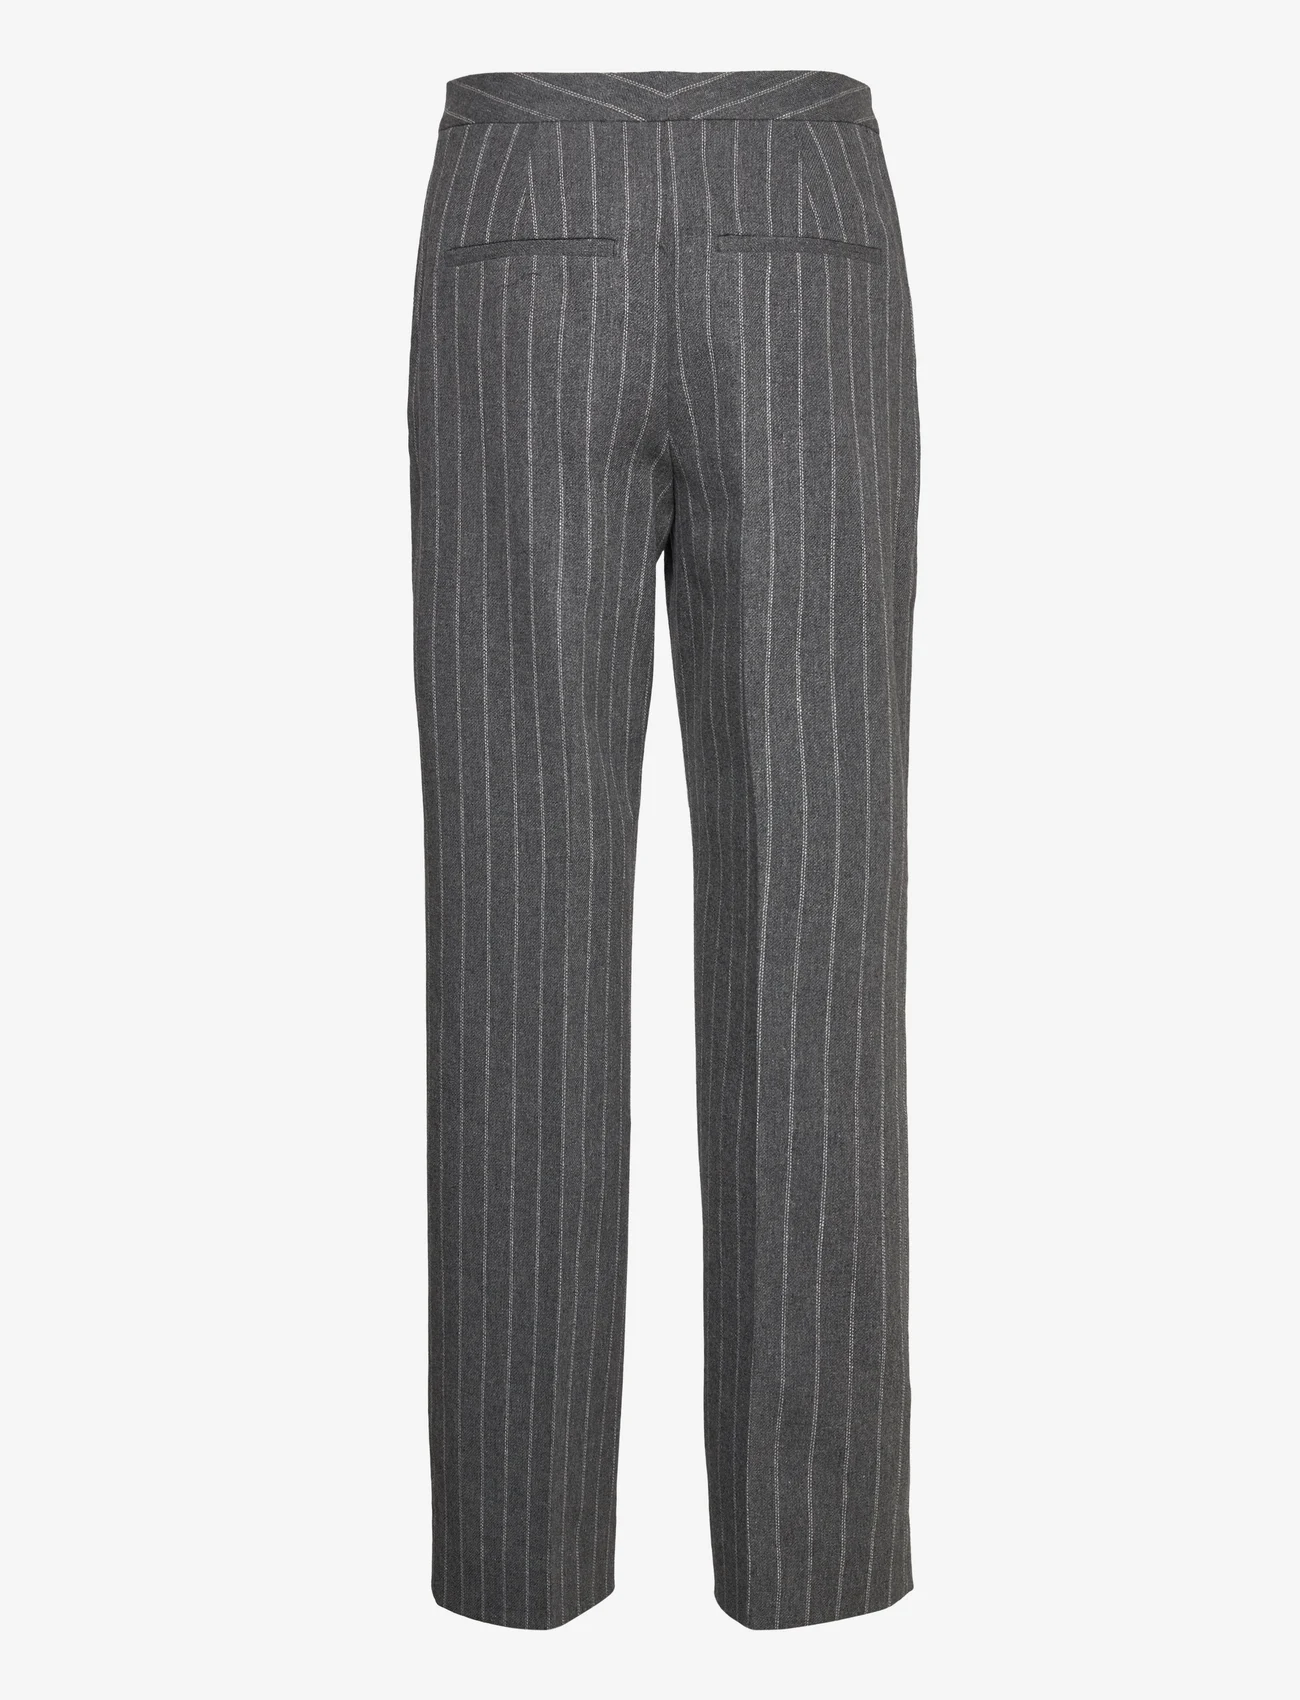 Wood Wood - Willow wool trousers - straight leg trousers - charcoal - 1